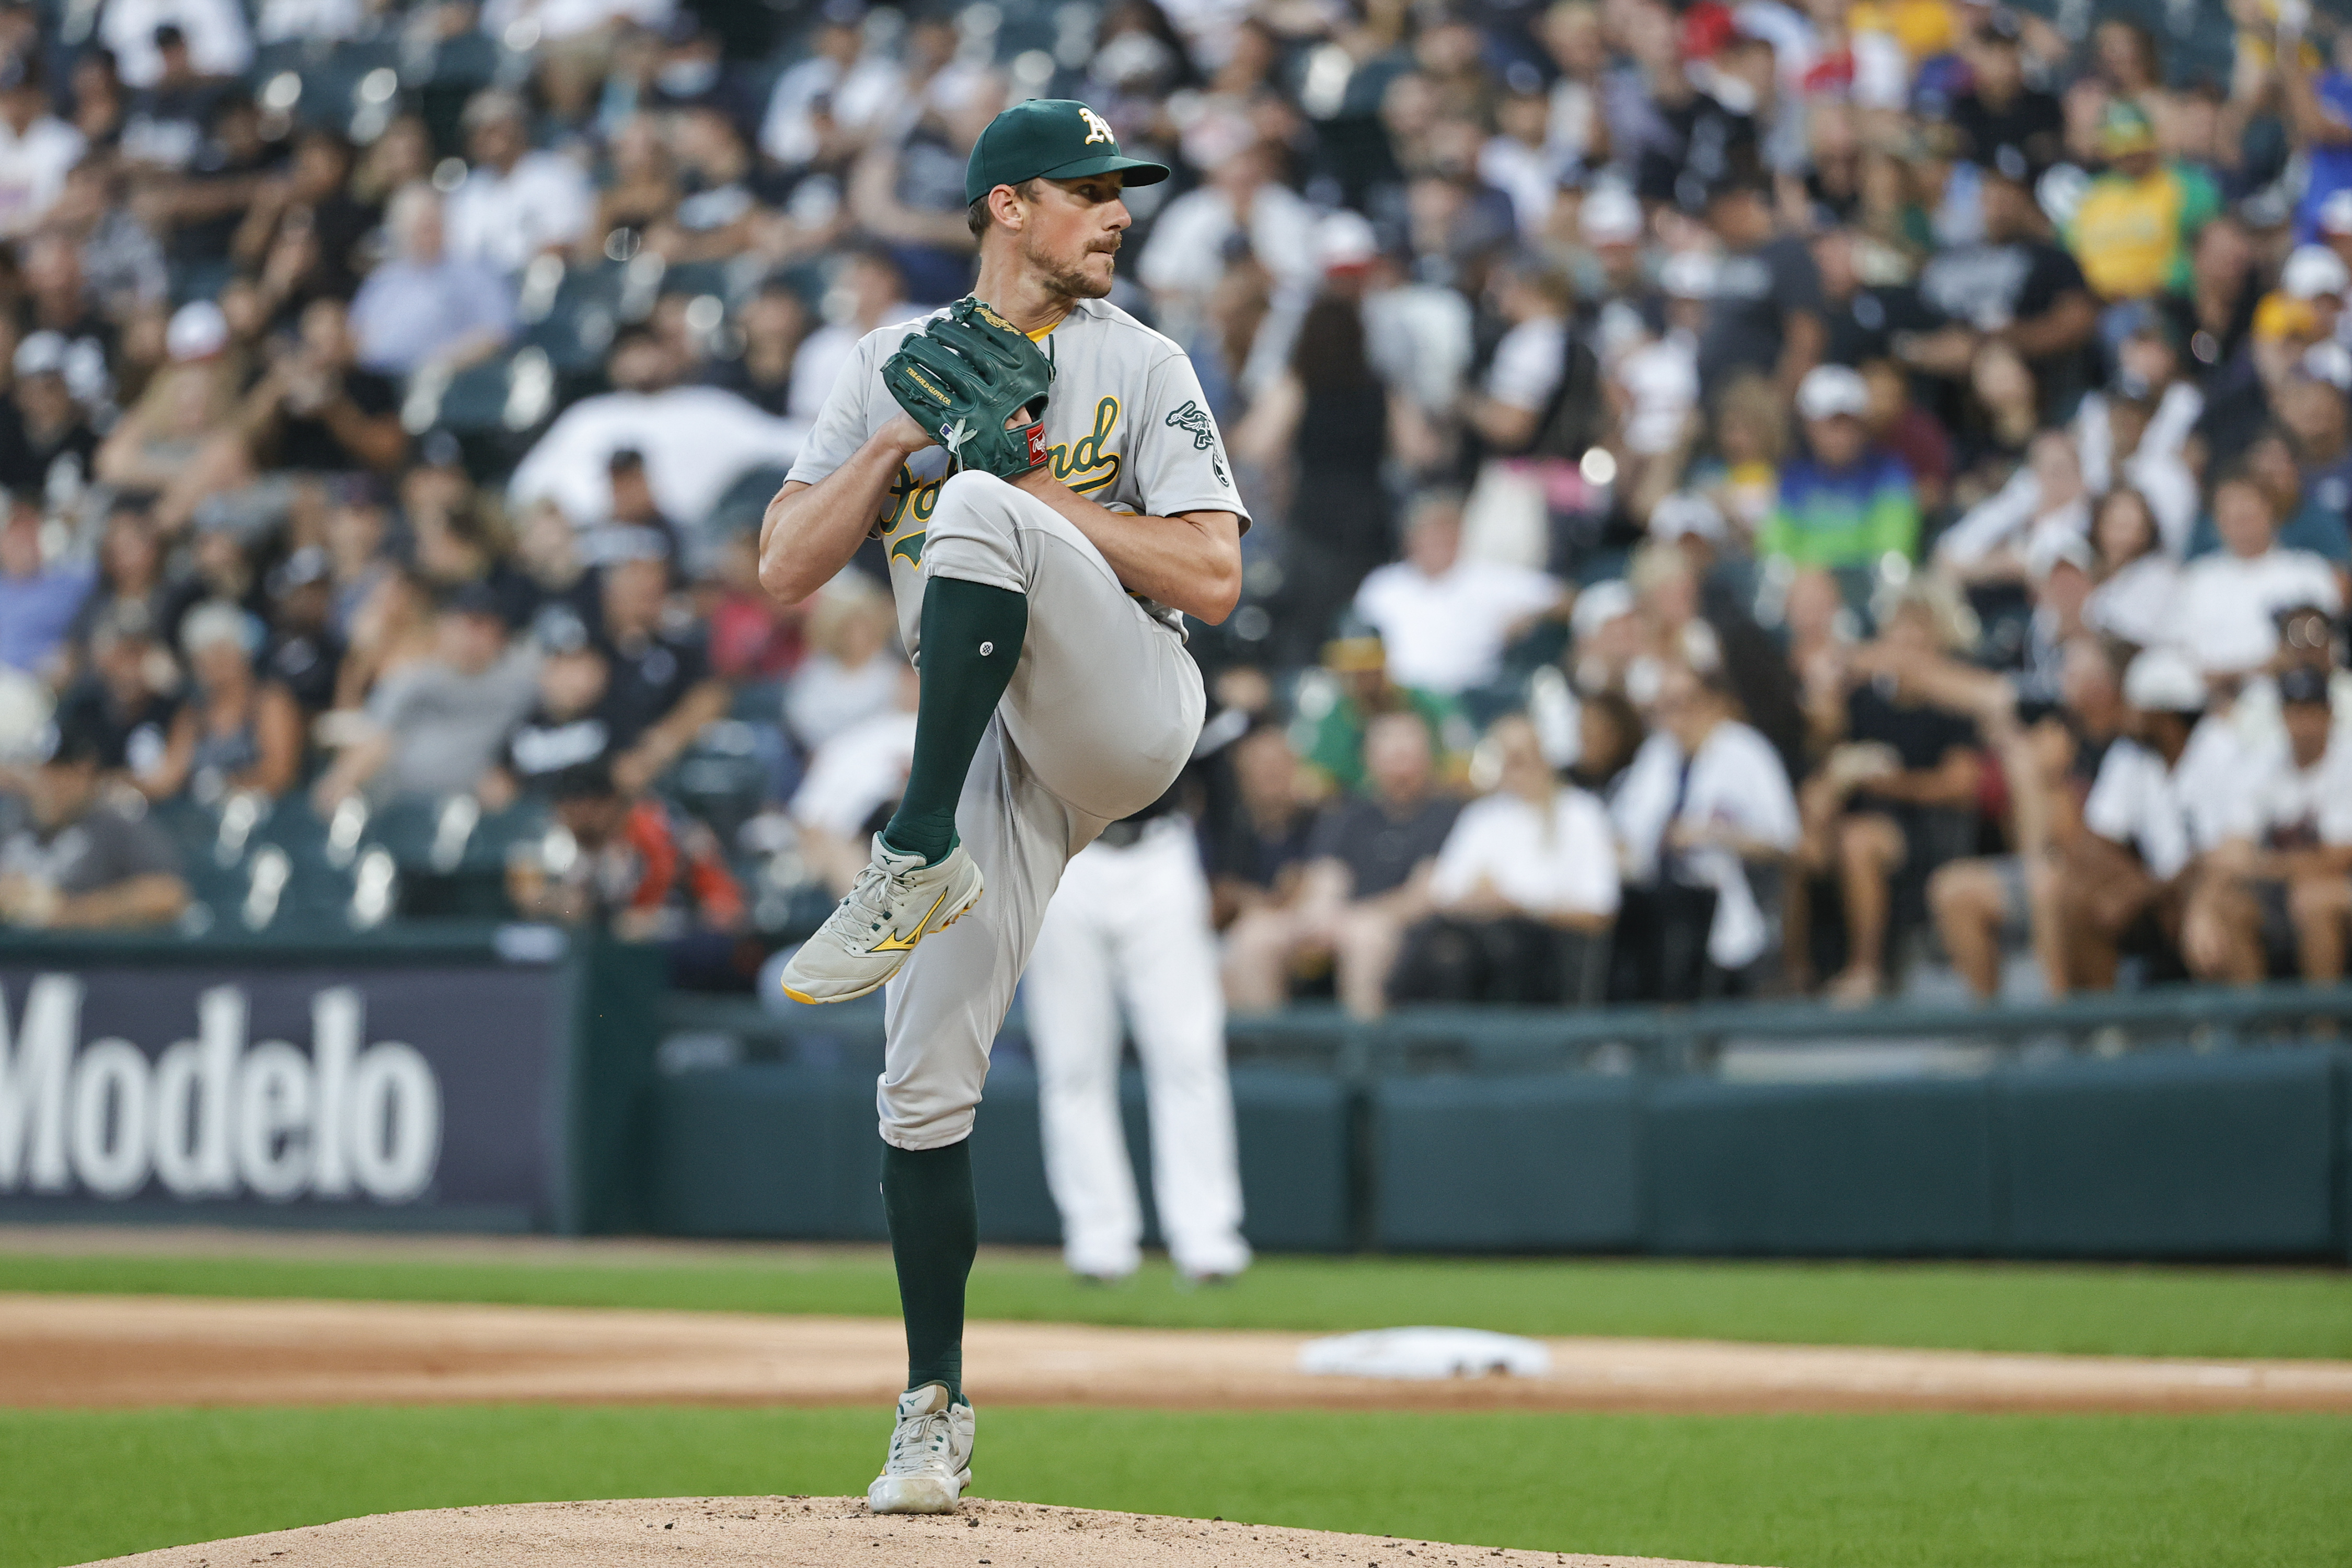 Oakland pitcher Bassitt 'conscious the entire time' after being hit on head